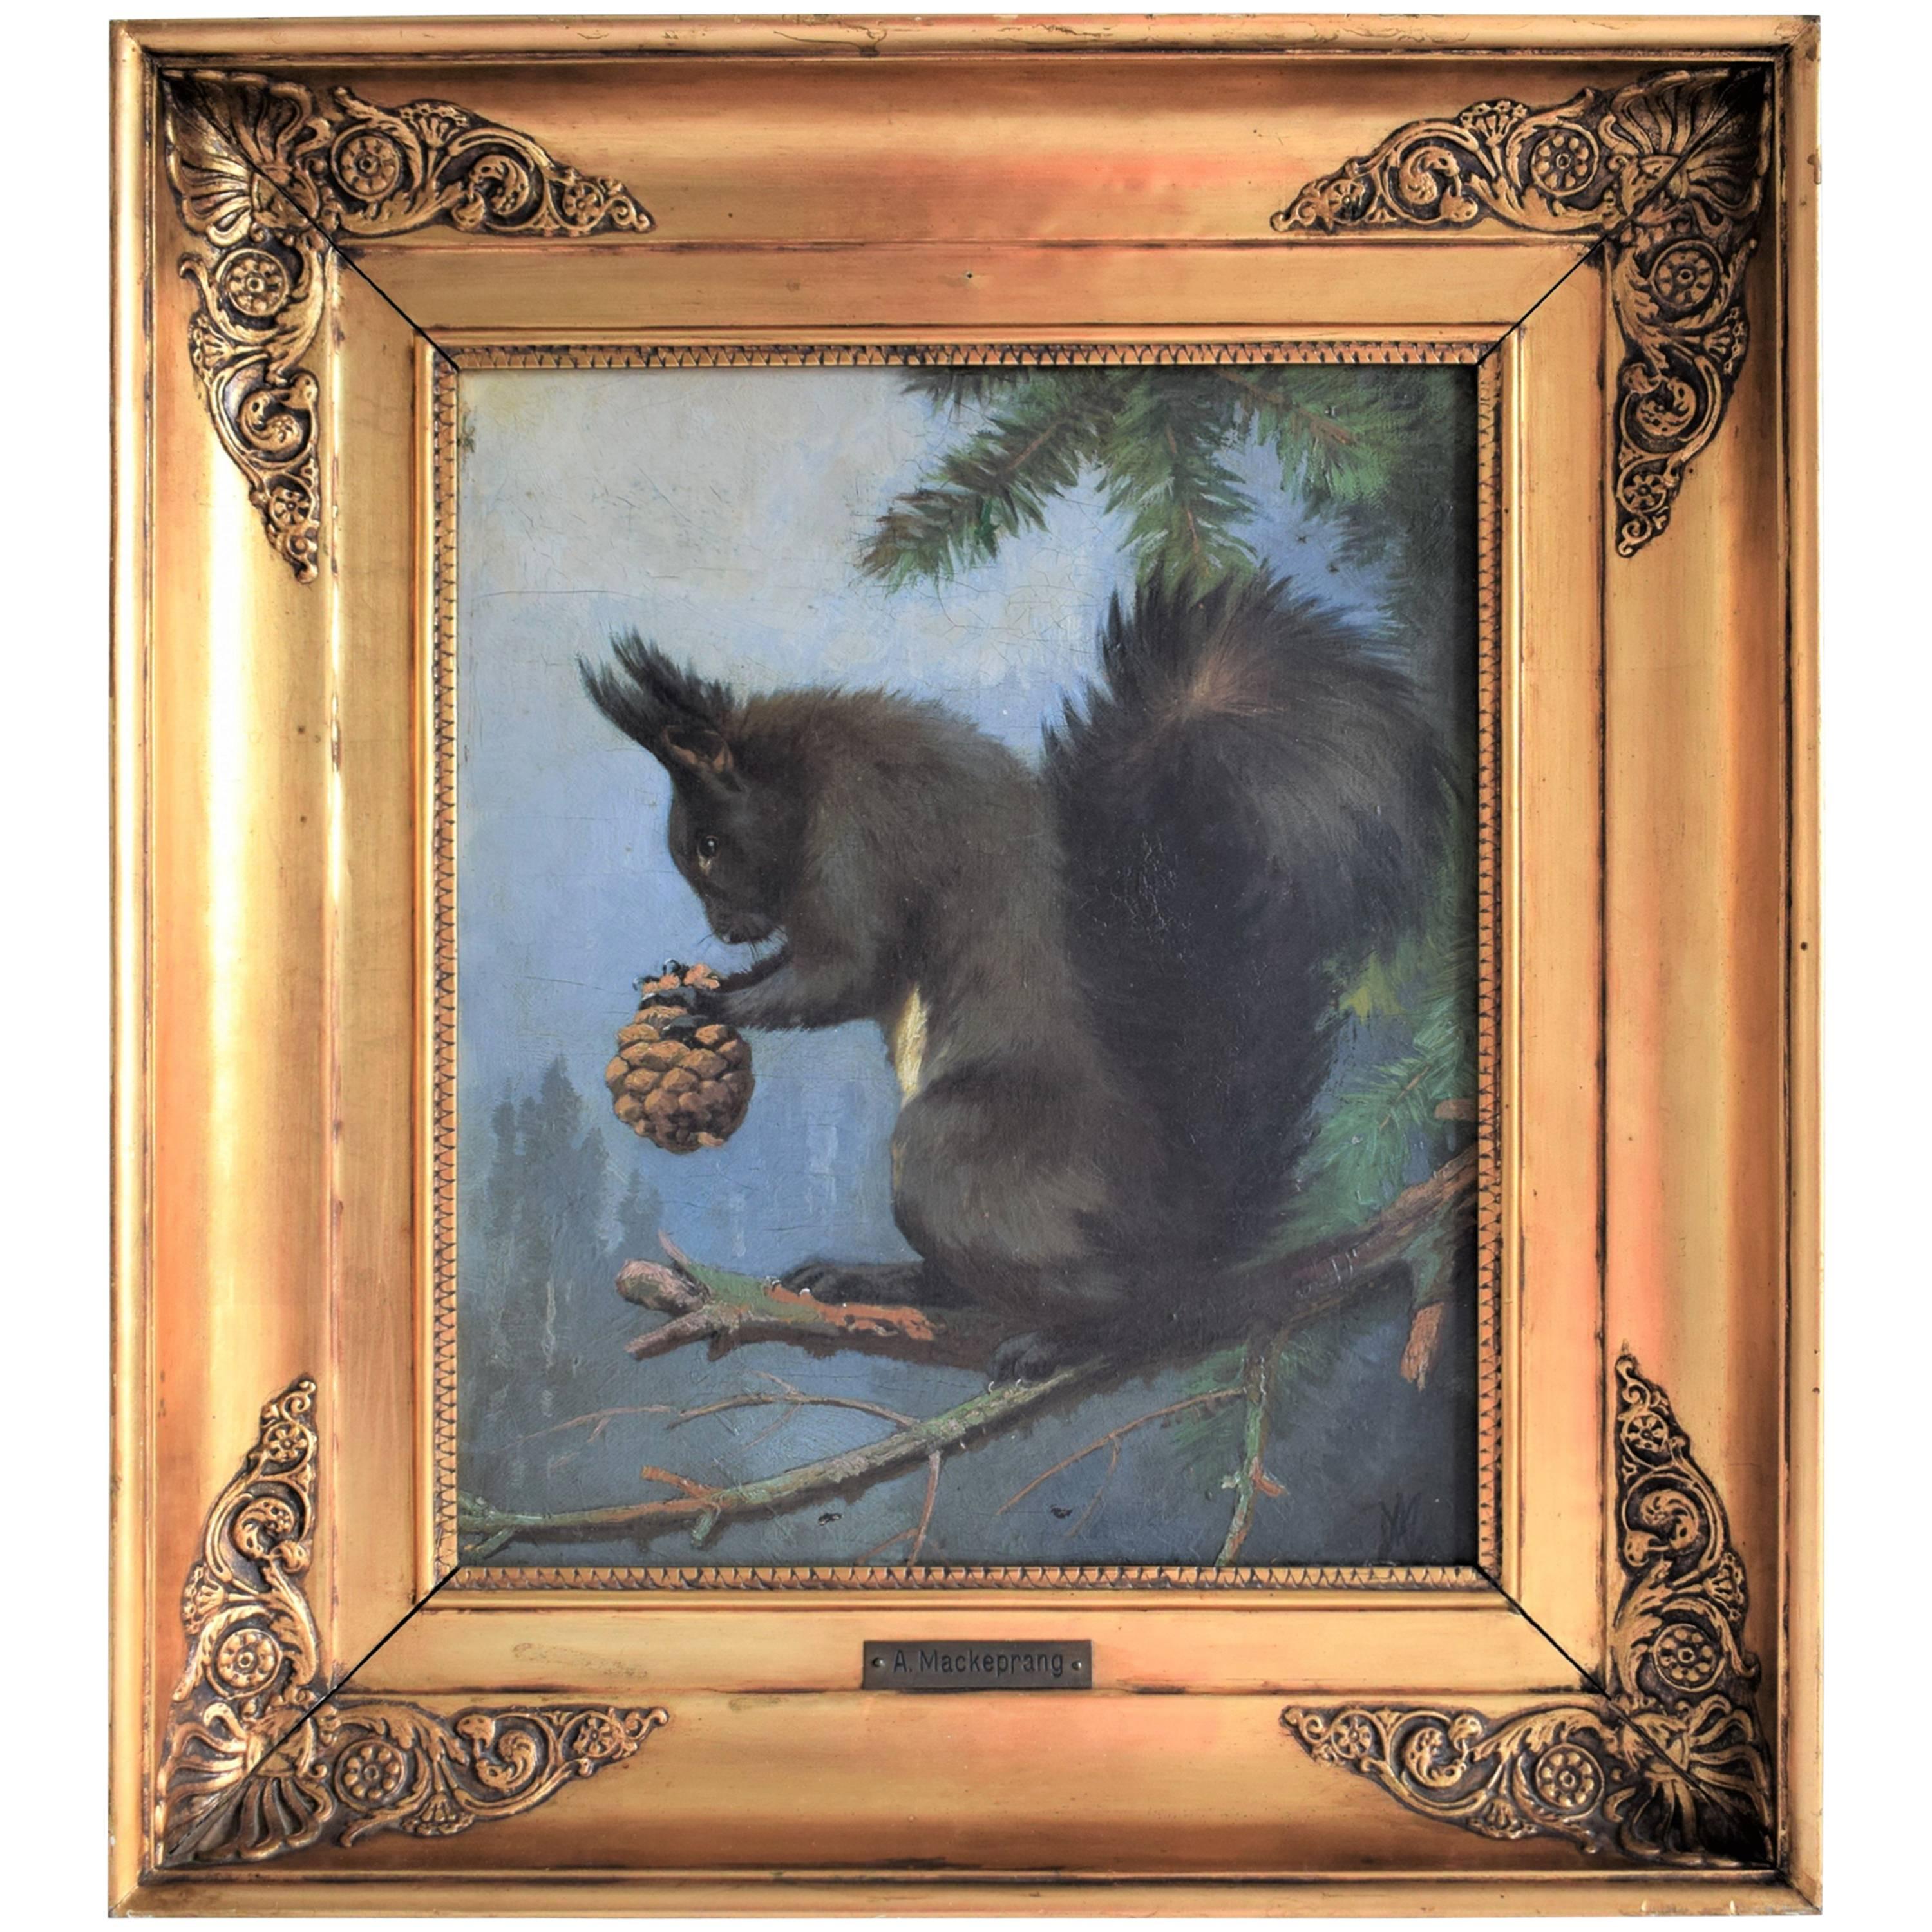 Late 19th Century, Squirrel Eating Cone by Adolf Mackeprang